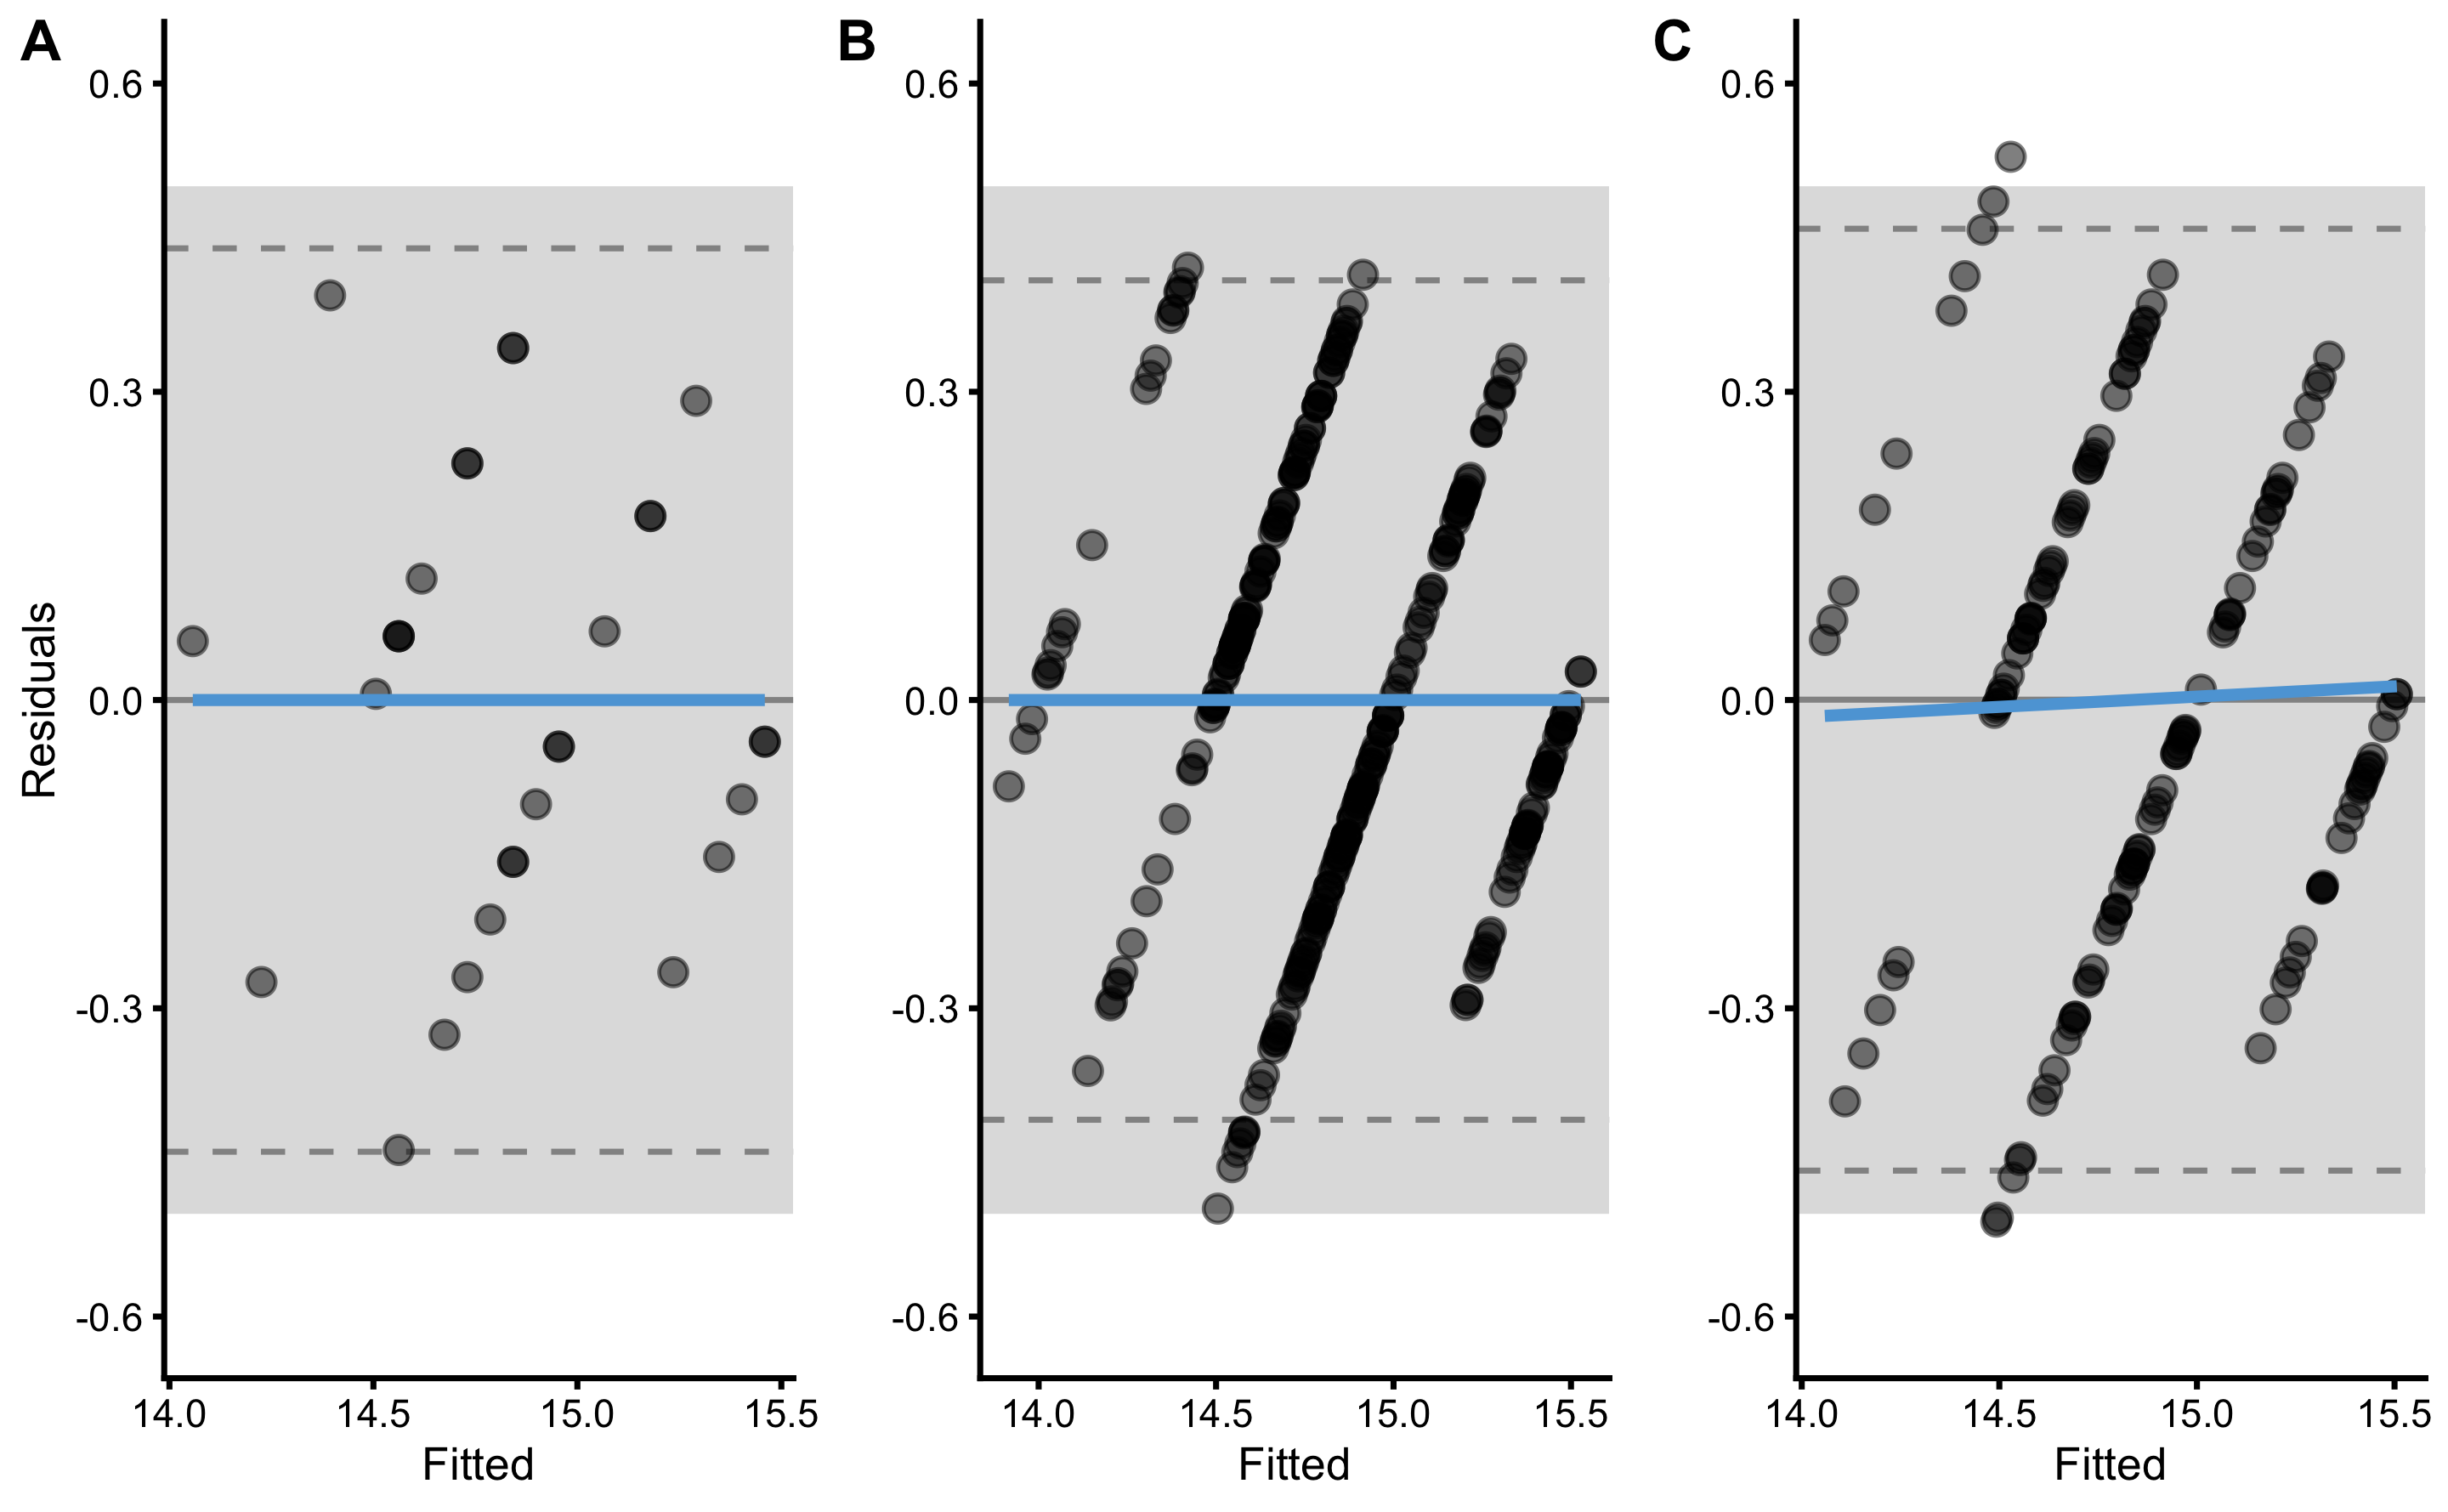 Residuals plot. A. Model residuals using the training data. This is exactly the same as panel B in Figure 3.9. B. Model residuals using the cross-validated training data. C. Model residuals using the cross-validated testing data.